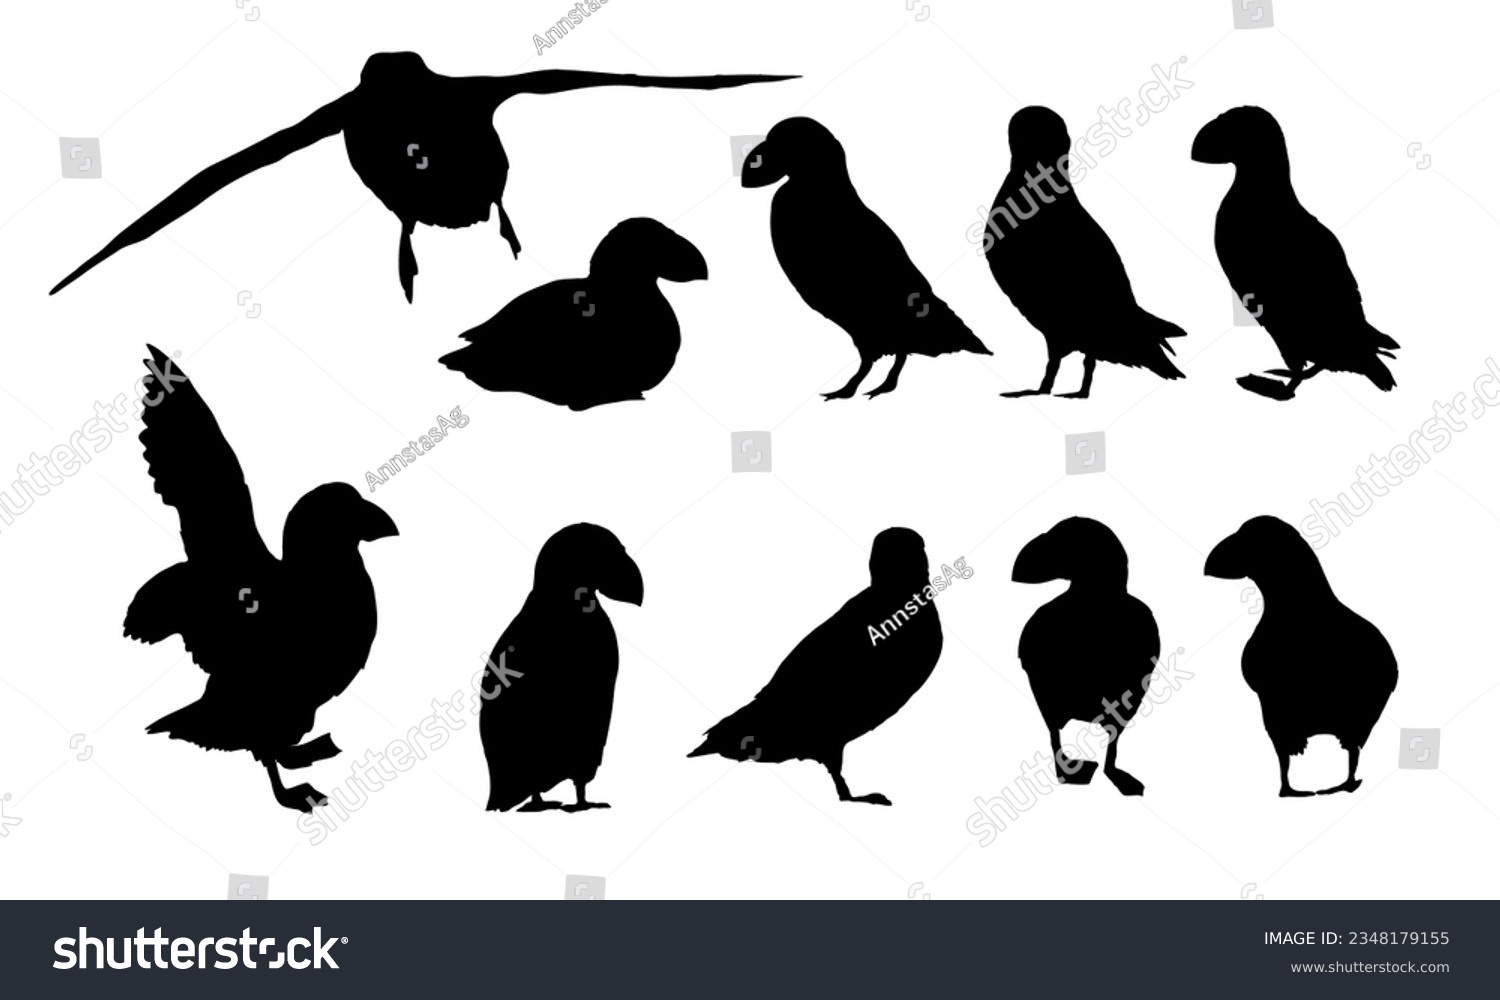 SVG of Atlantic puffin silhouettes set. Realistic Fratercula arctica or common puffin birds in different poses. vector birds svg